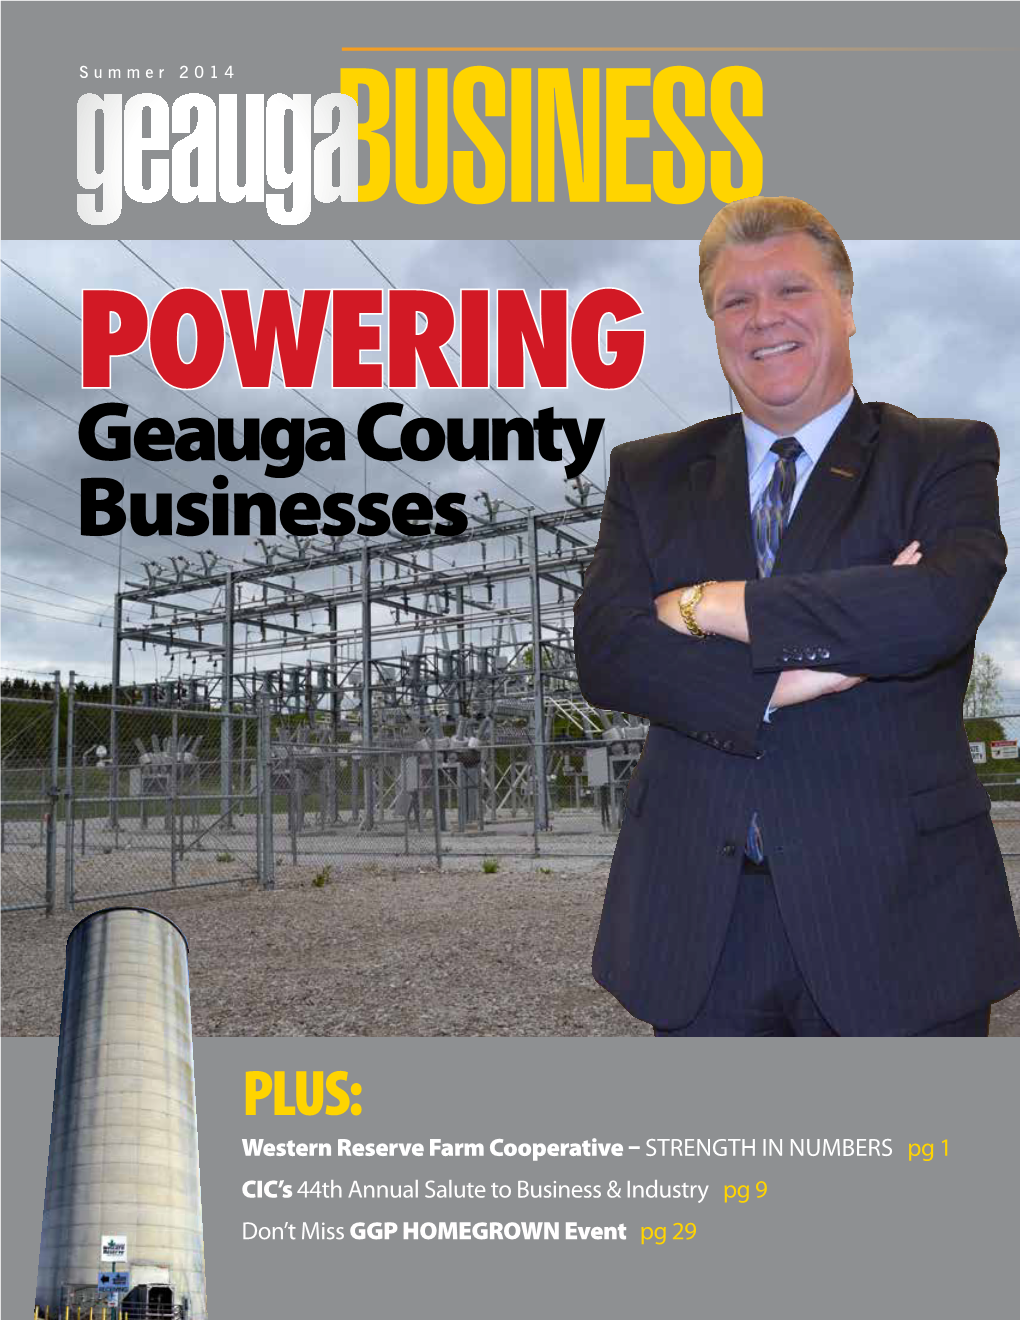 Geauga County Businesses